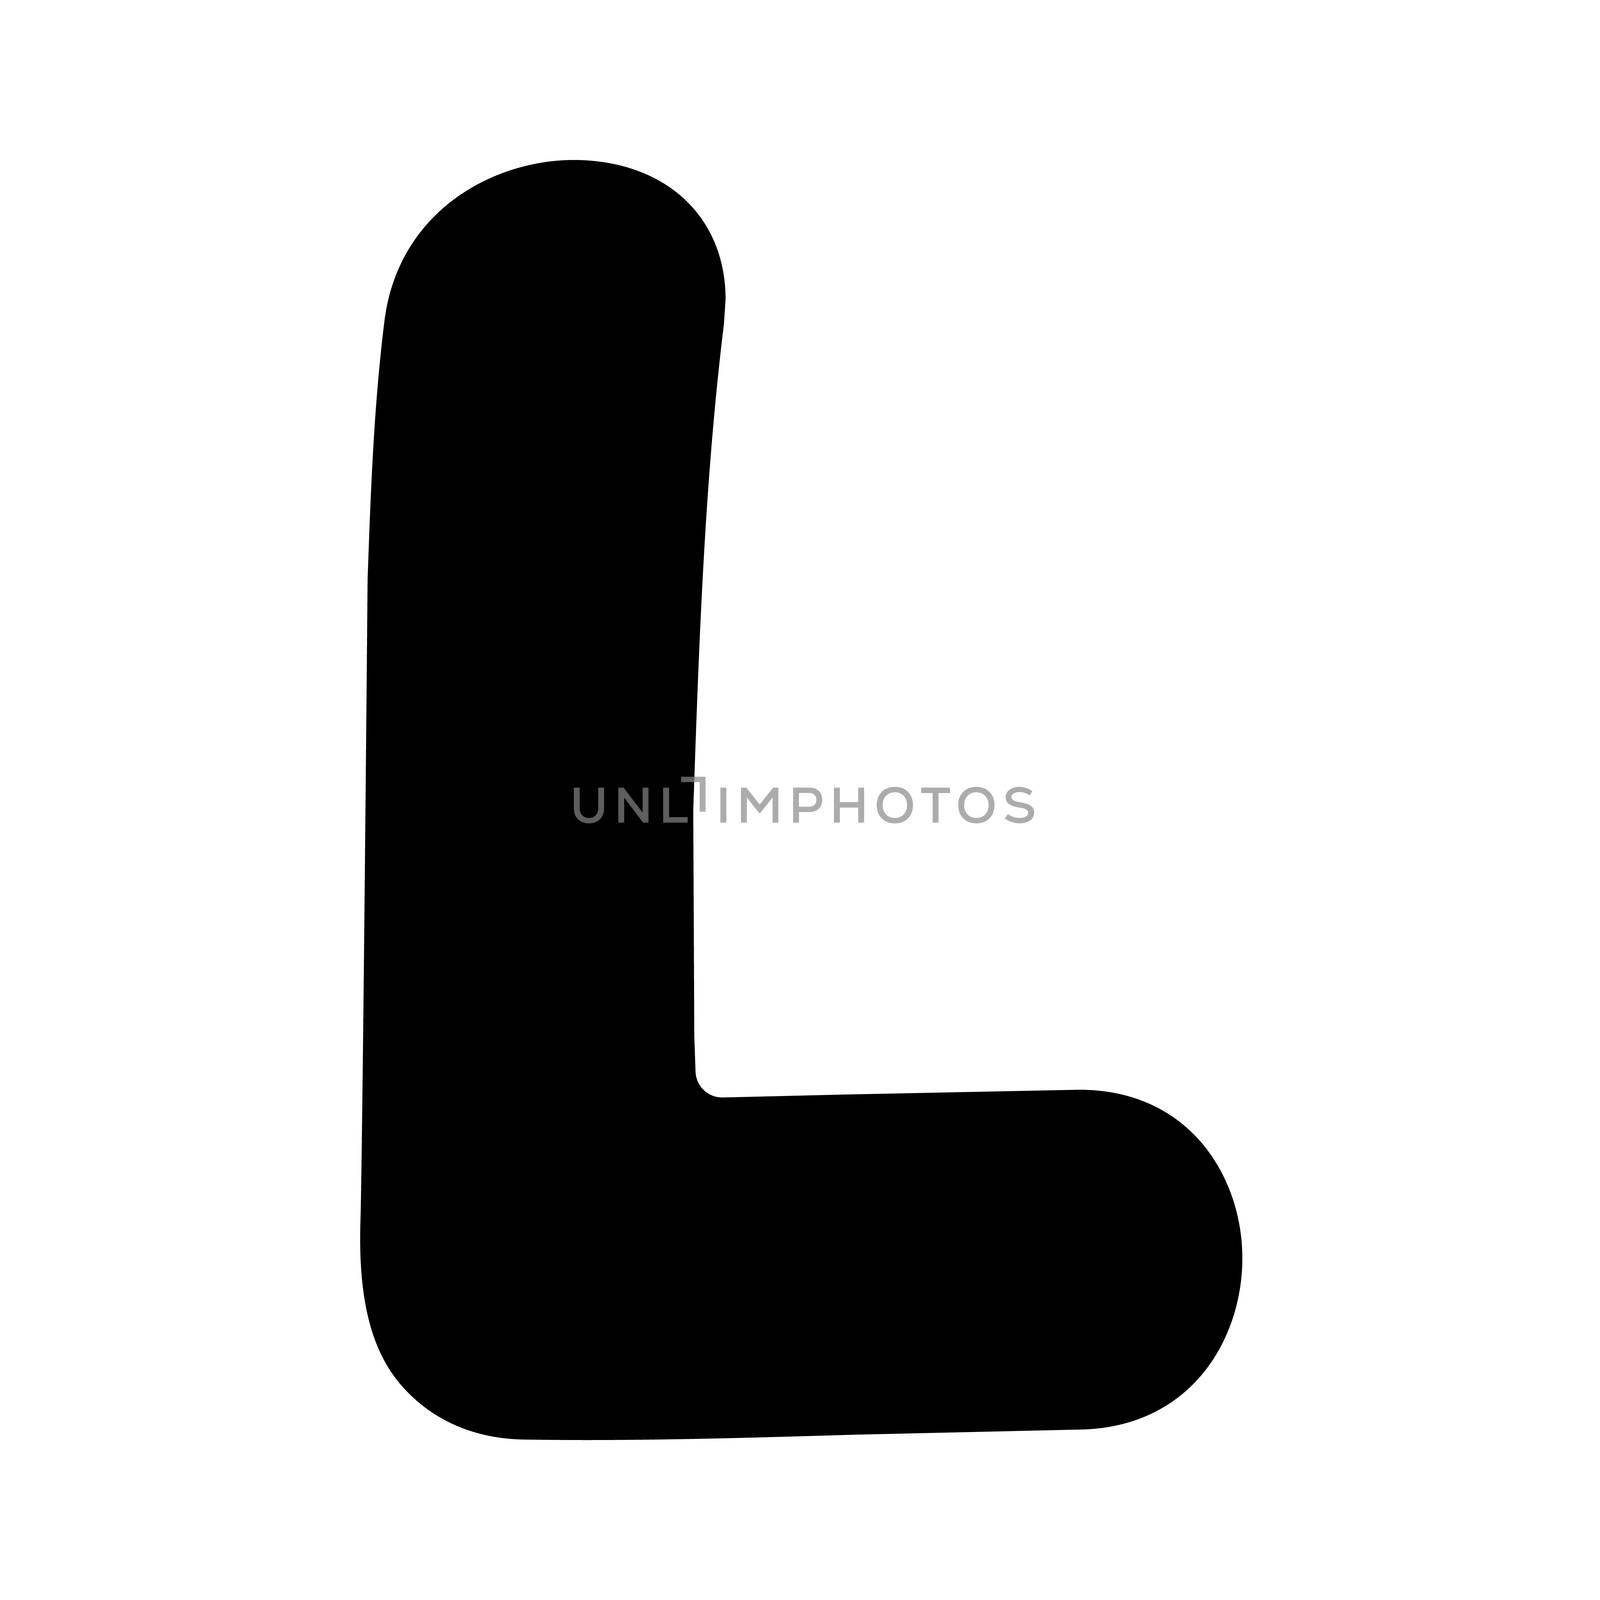 Original font, hand drawn funny fat capital letter isolated on white, part of a full series
